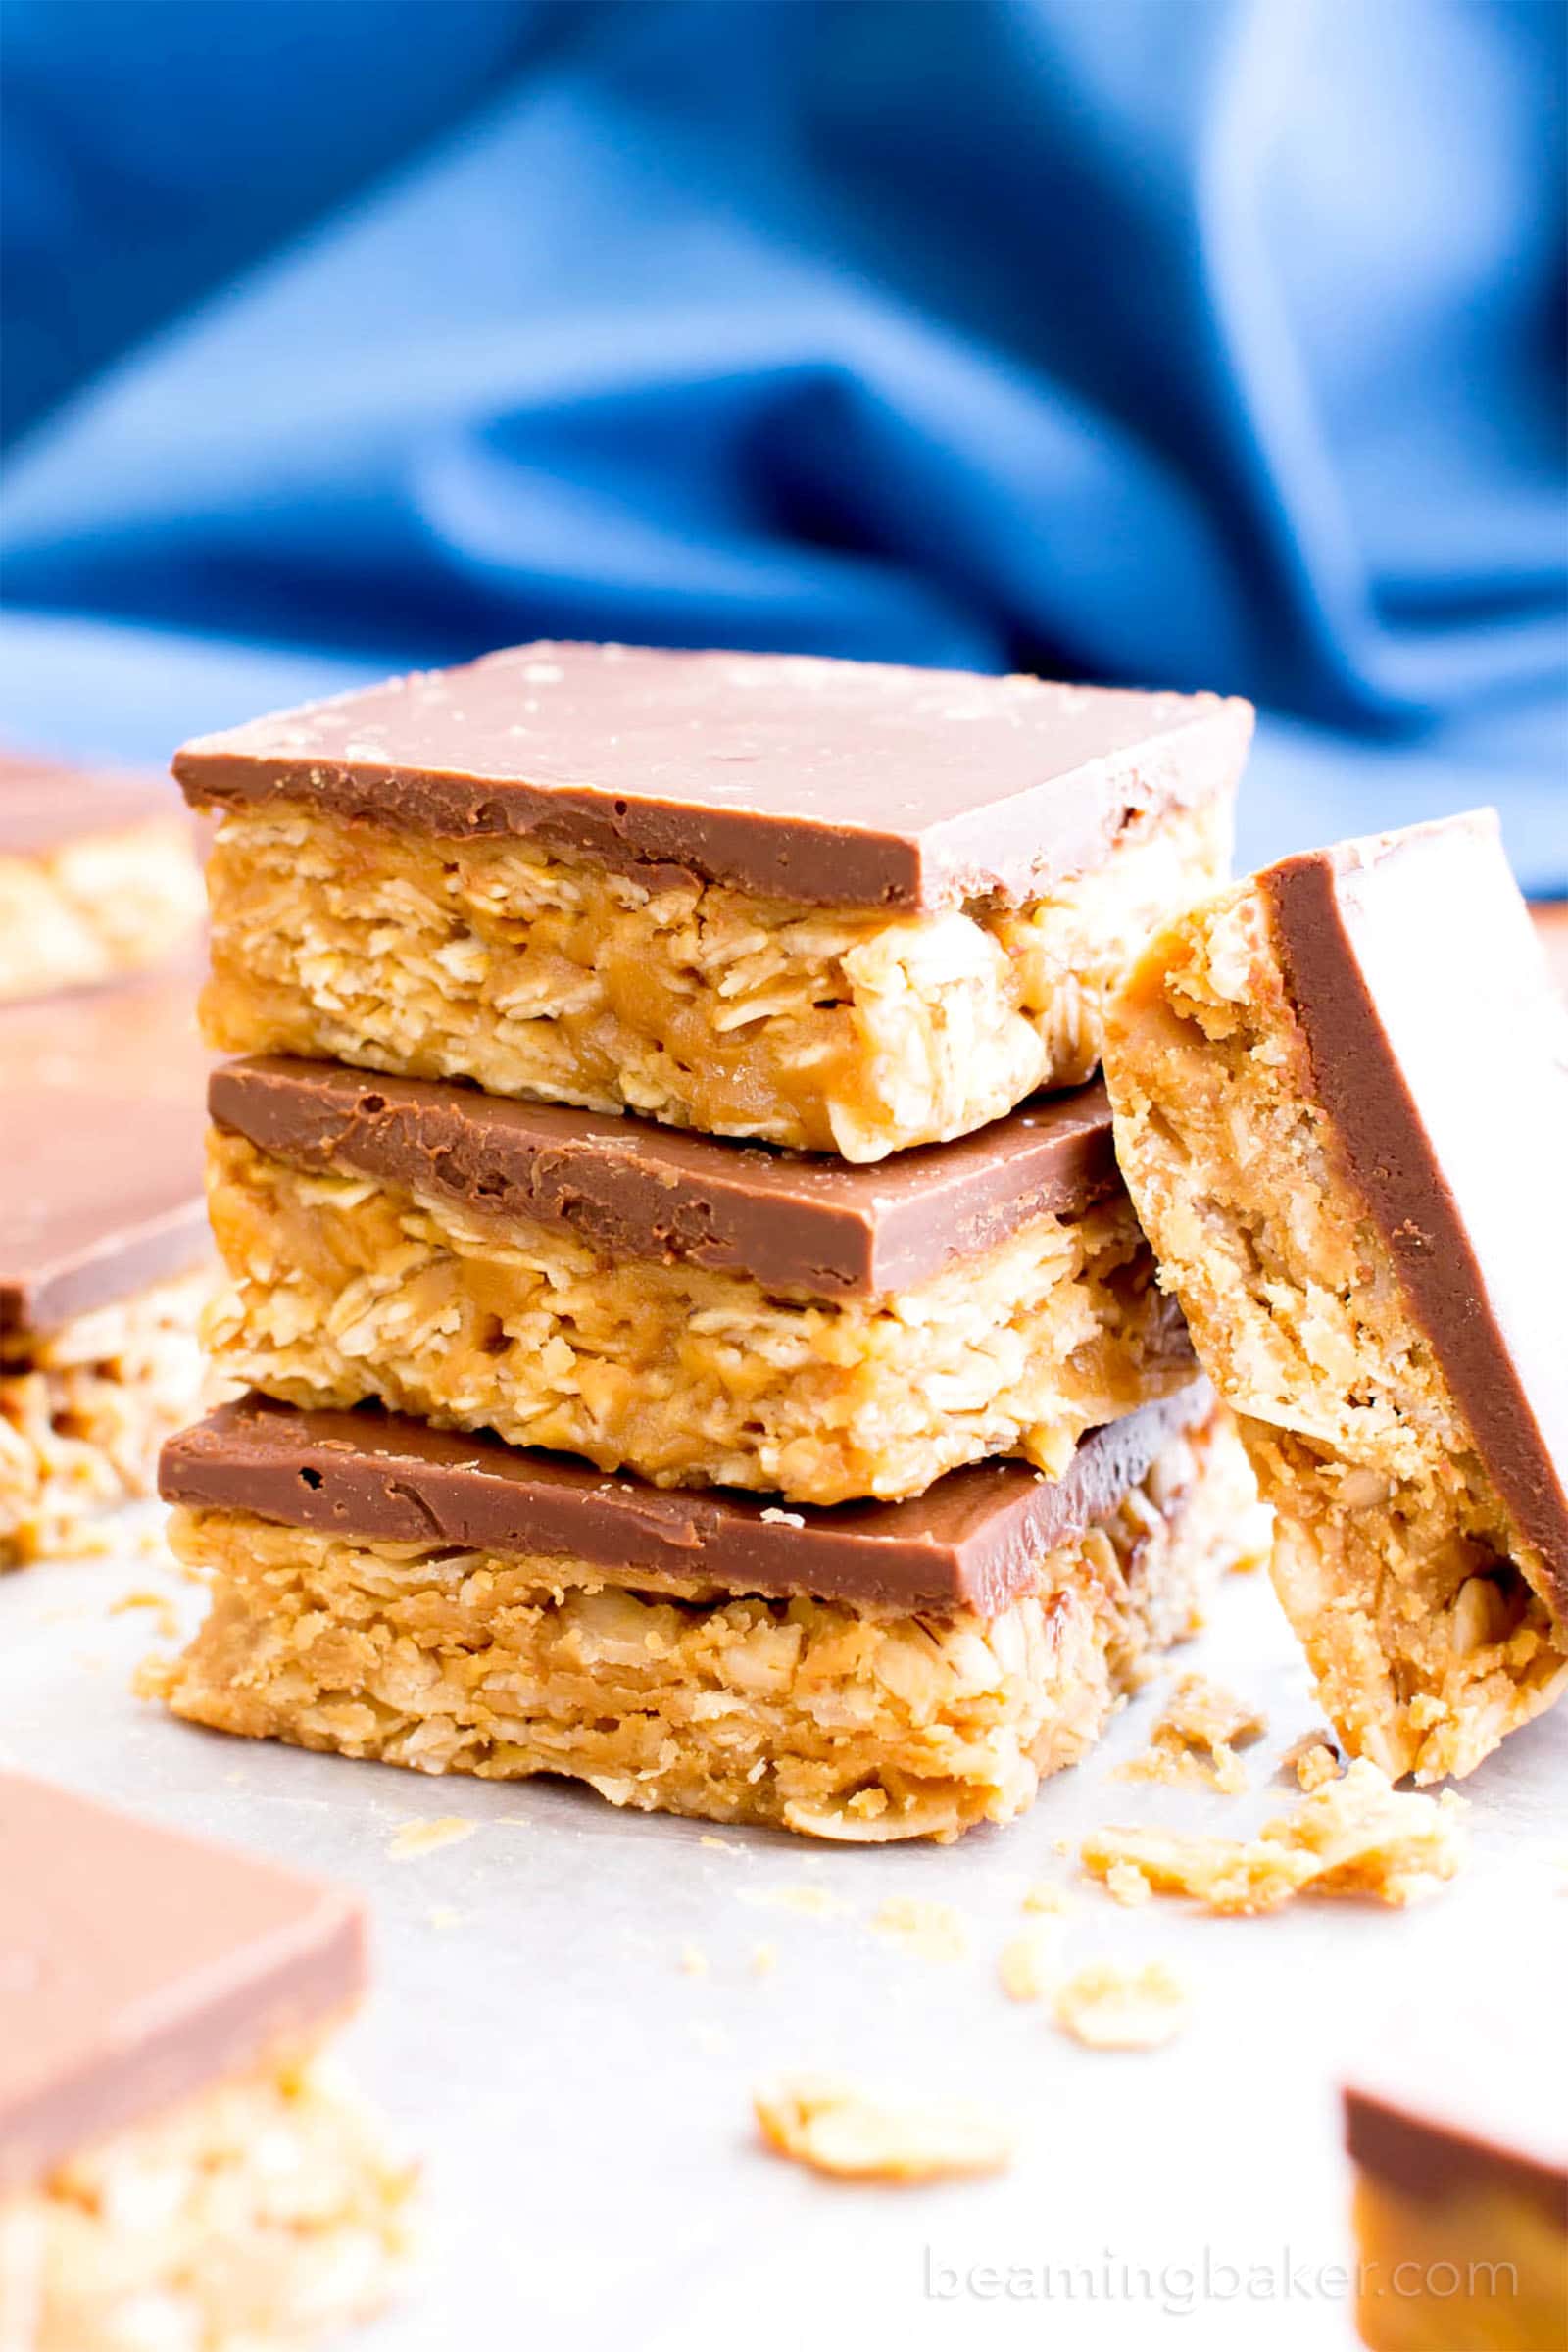 4 Ingredient No Bake Chocolate Peanut Butter Cup Granola Bars (GF, V): an easy, protein-rich recipe for decadent PB granola bars covered in chocolate, made with whole ingredients. #Vegan #ProteinPacked #GlutenFree #DairyFree #WholeGrain | BeamingBaker.com